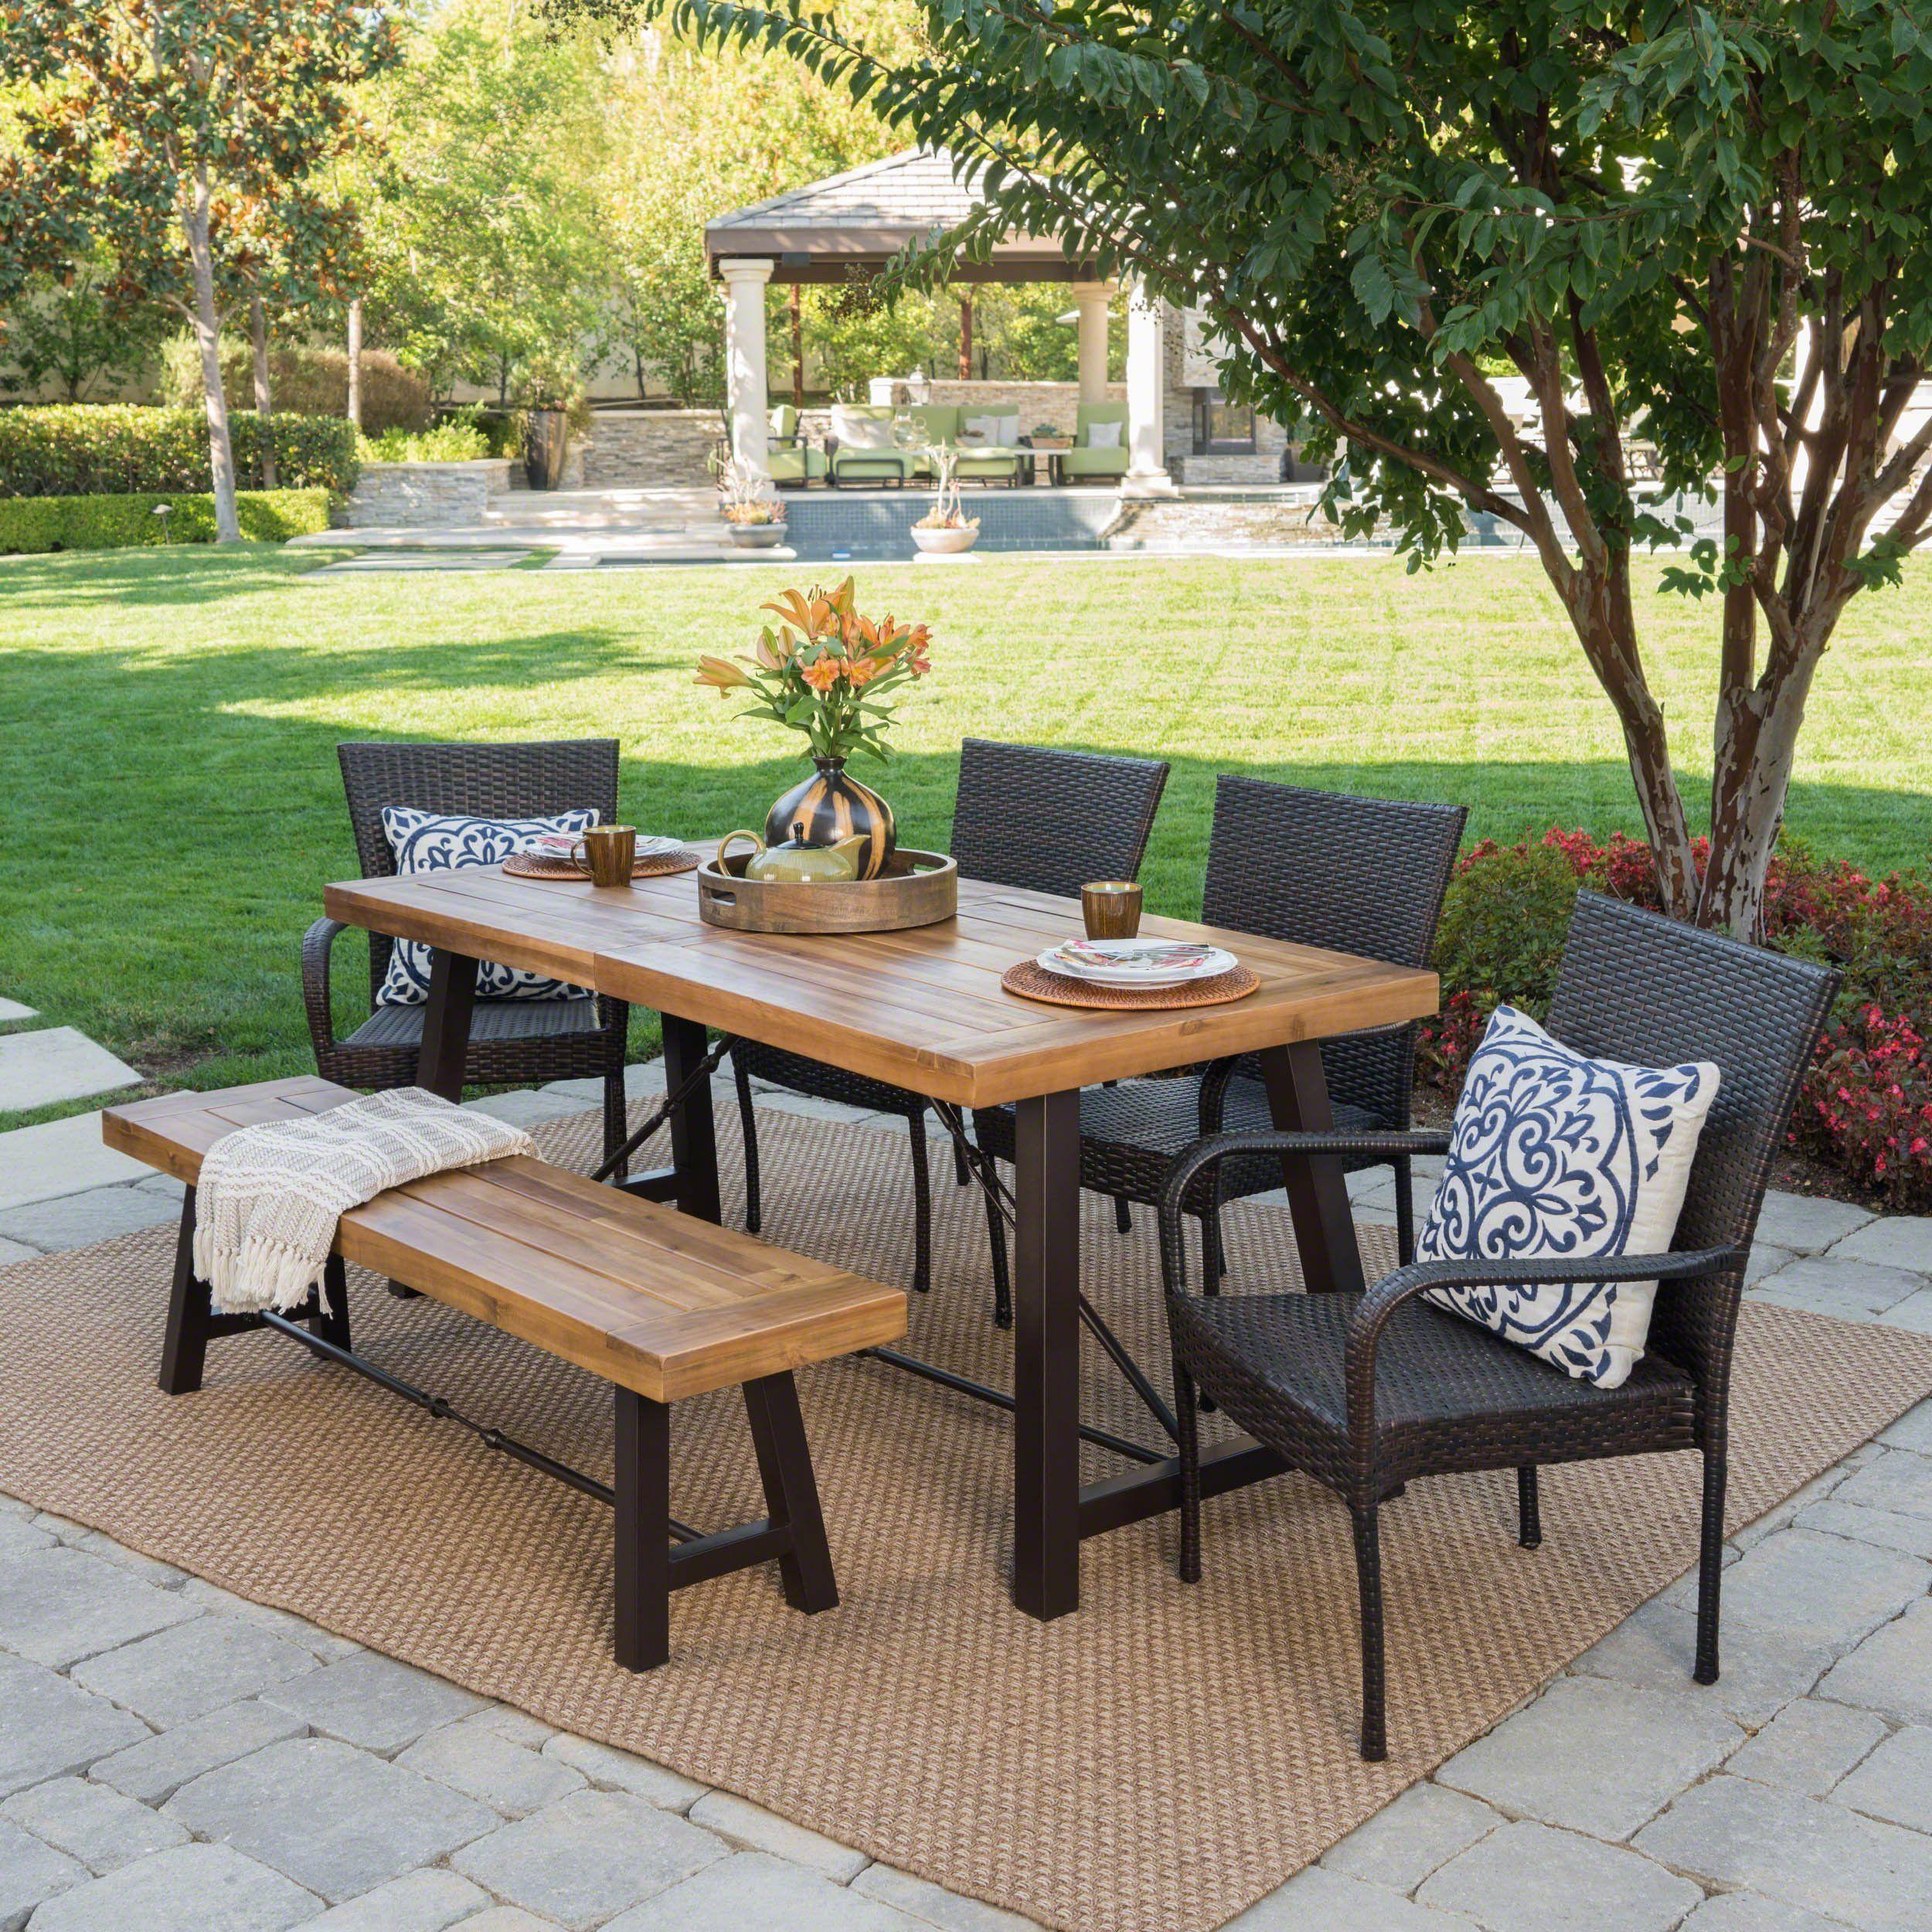 Flagstone Paver Patio With Outdoor Dining